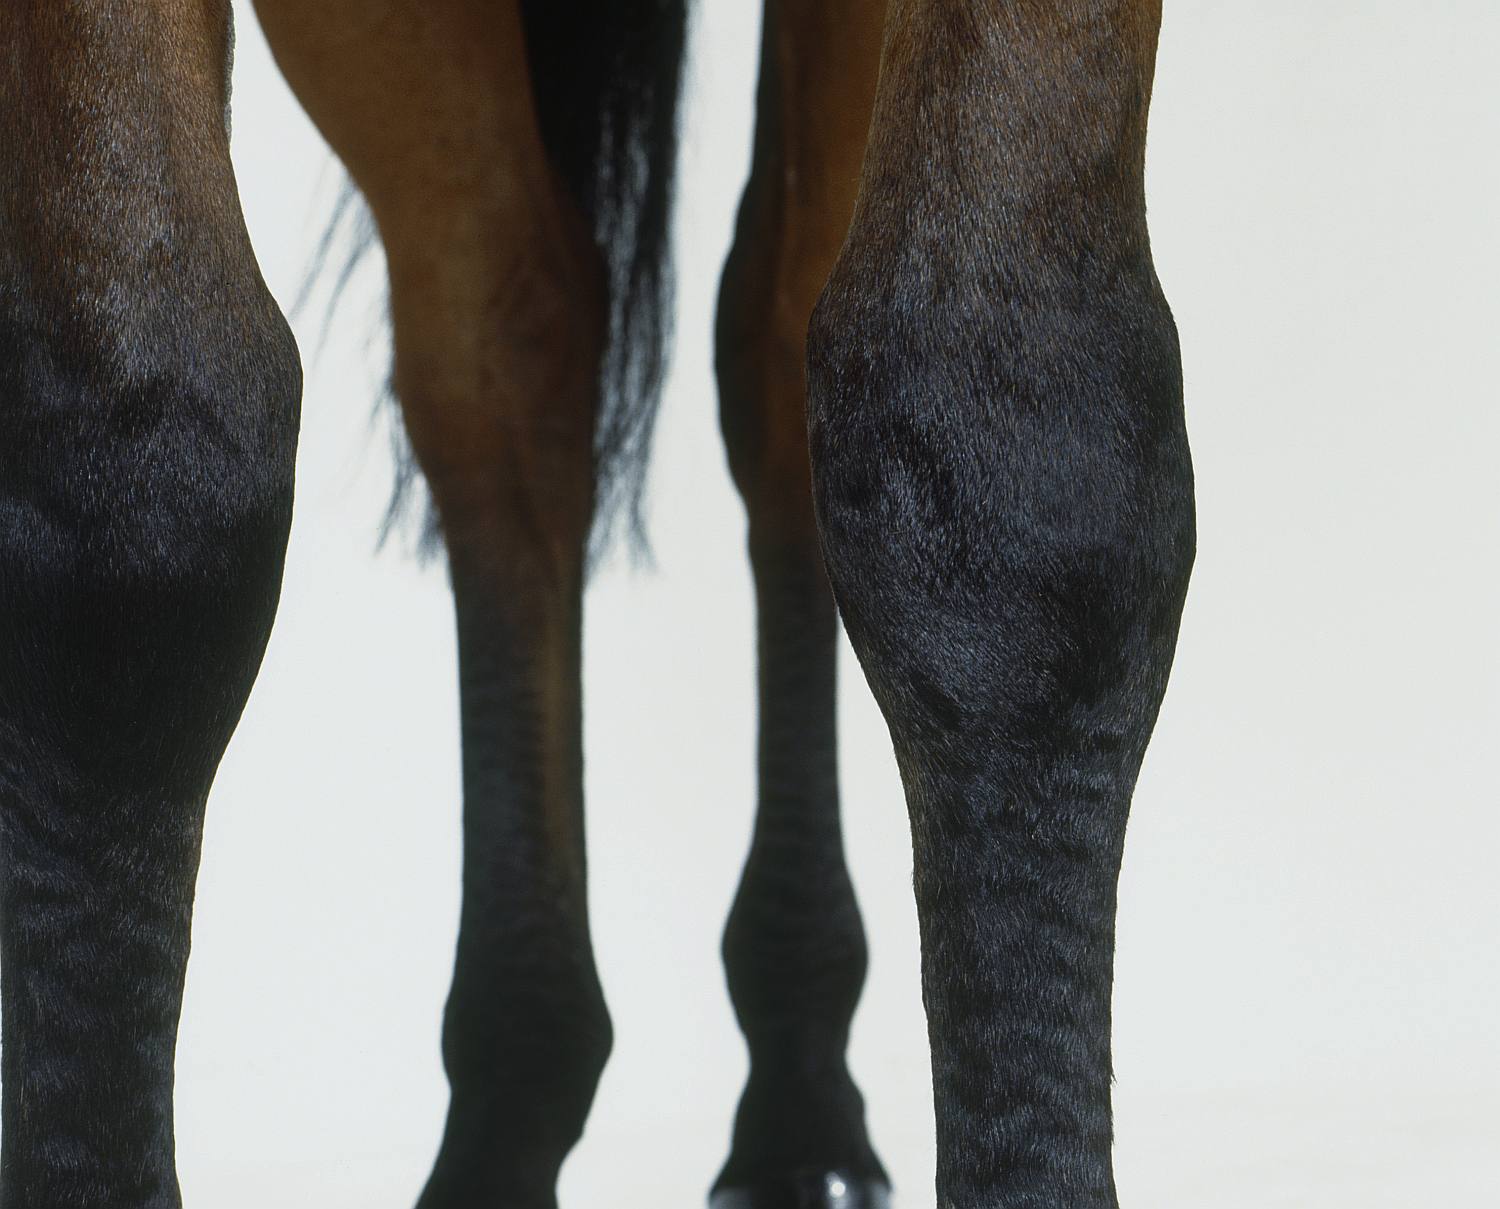 A horse's knee.